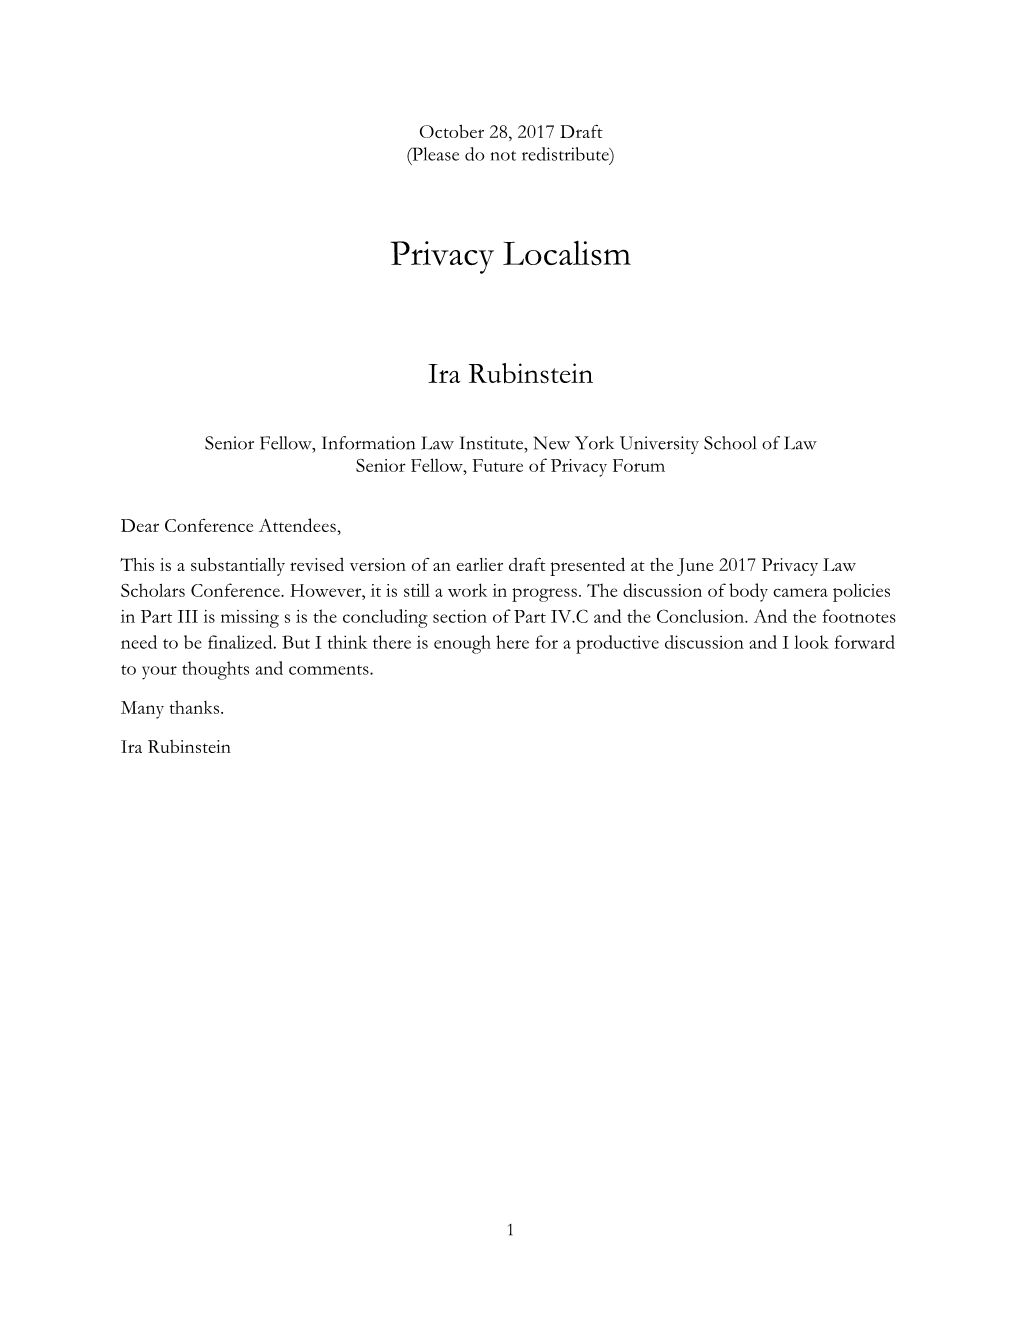 Privacy Localism